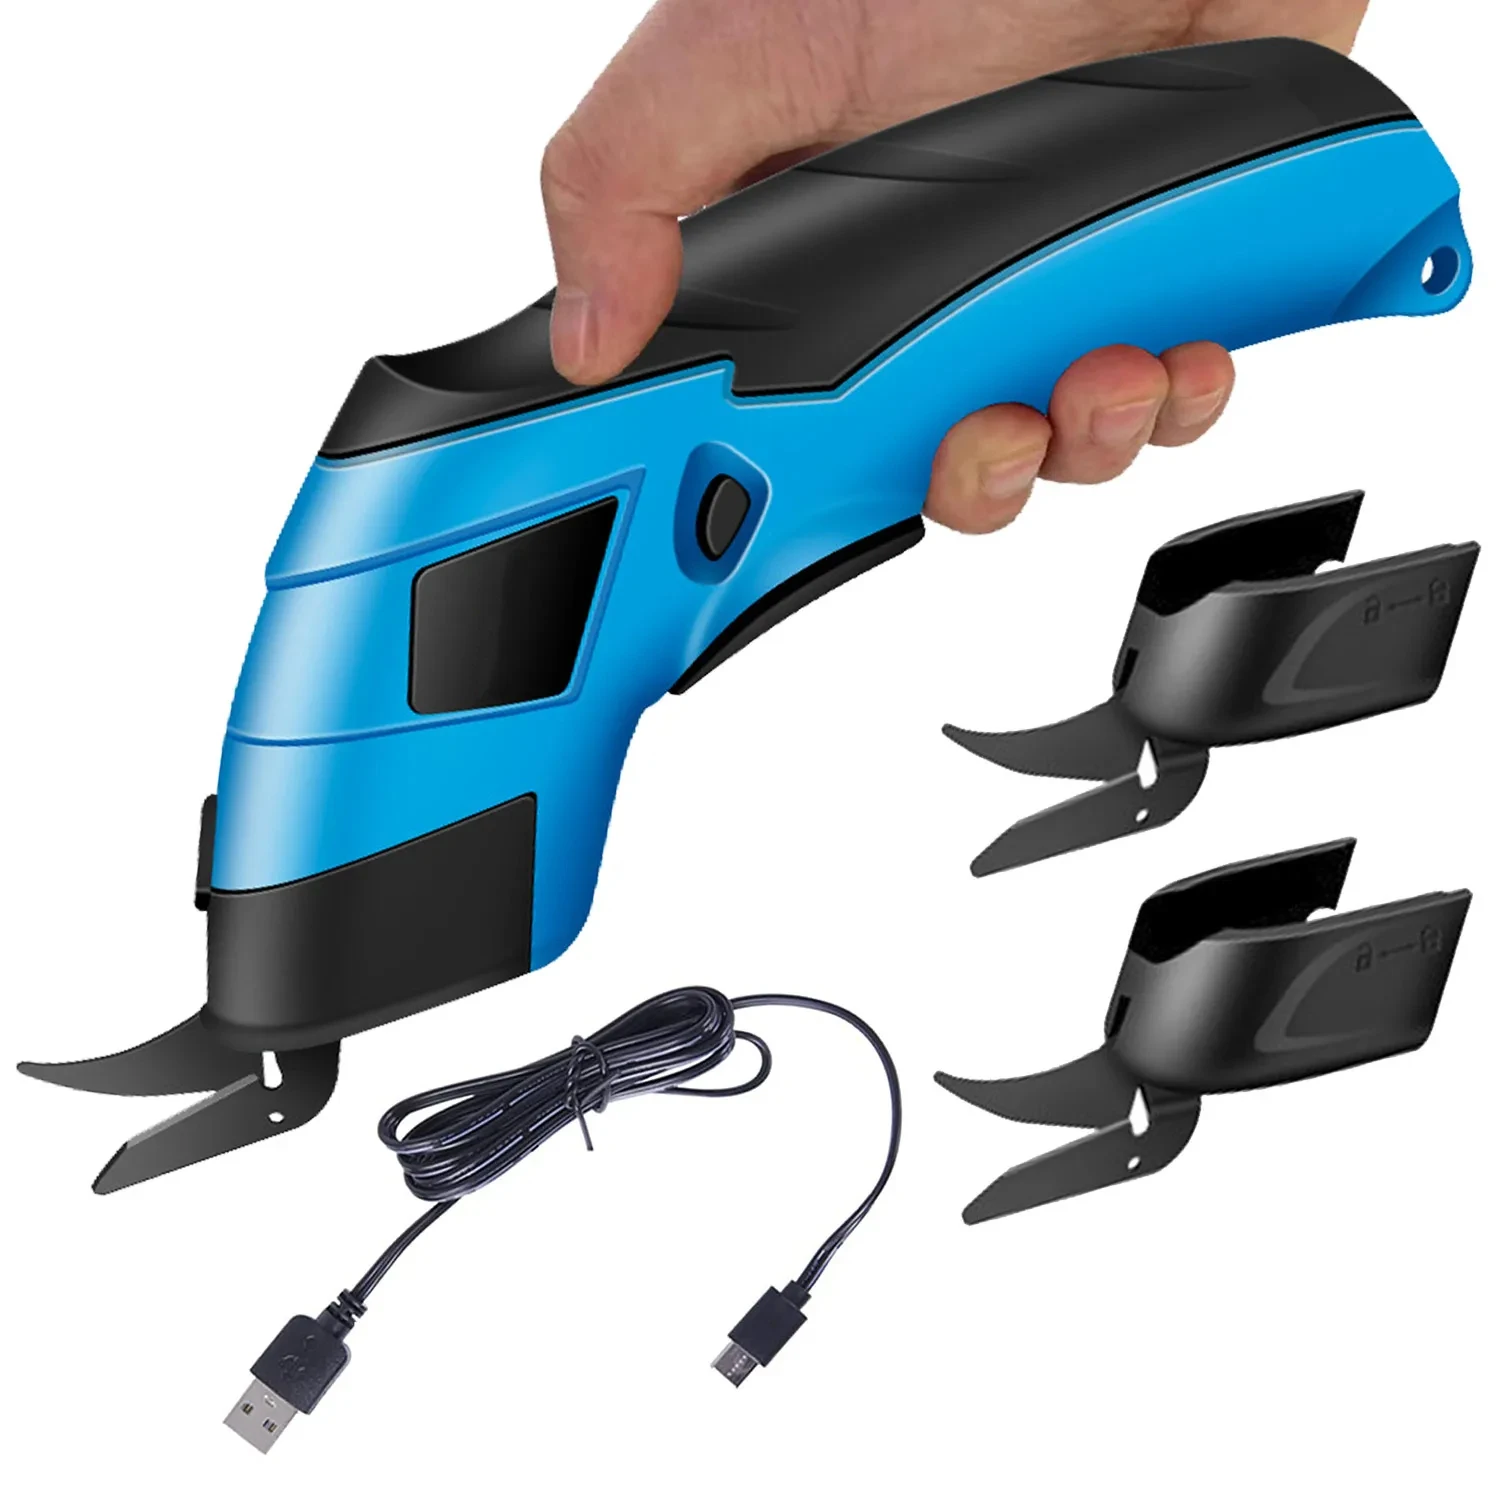 Electric Scissors Fabric Cutting Machine Leather Tailor Scissors With Tungsten Steel Blades USB Rechargeable Portable Power Tool fcst high precision single core fiber cleaver hardness tungsten steel blades ftth optic cutting knife tools